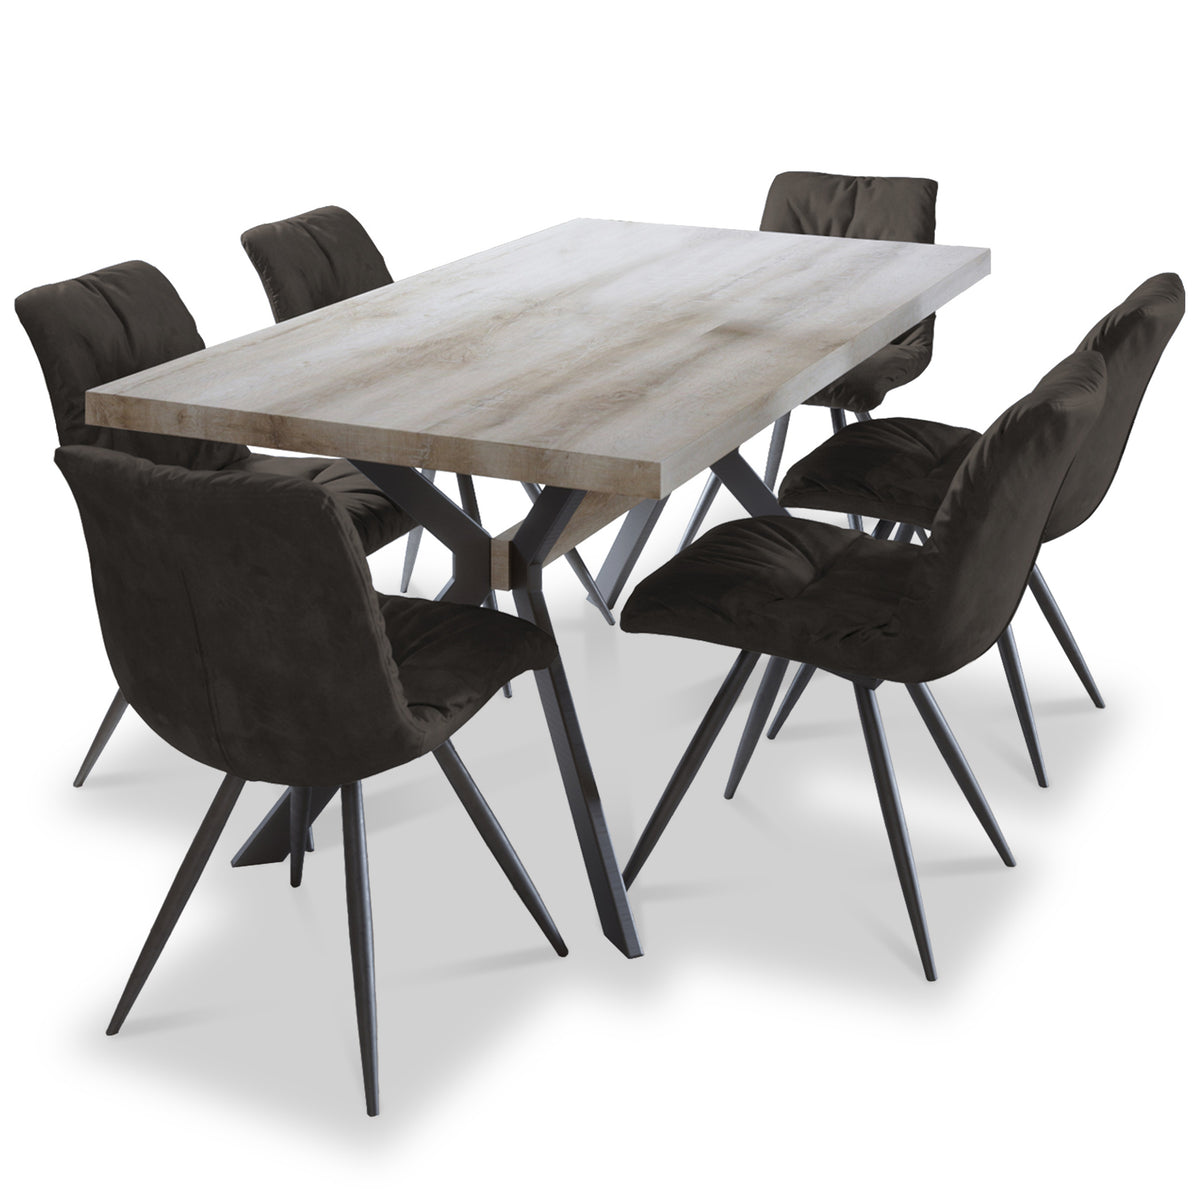 Allen 1.8m Dining Table with 6 Addison Dark Brown Chairs